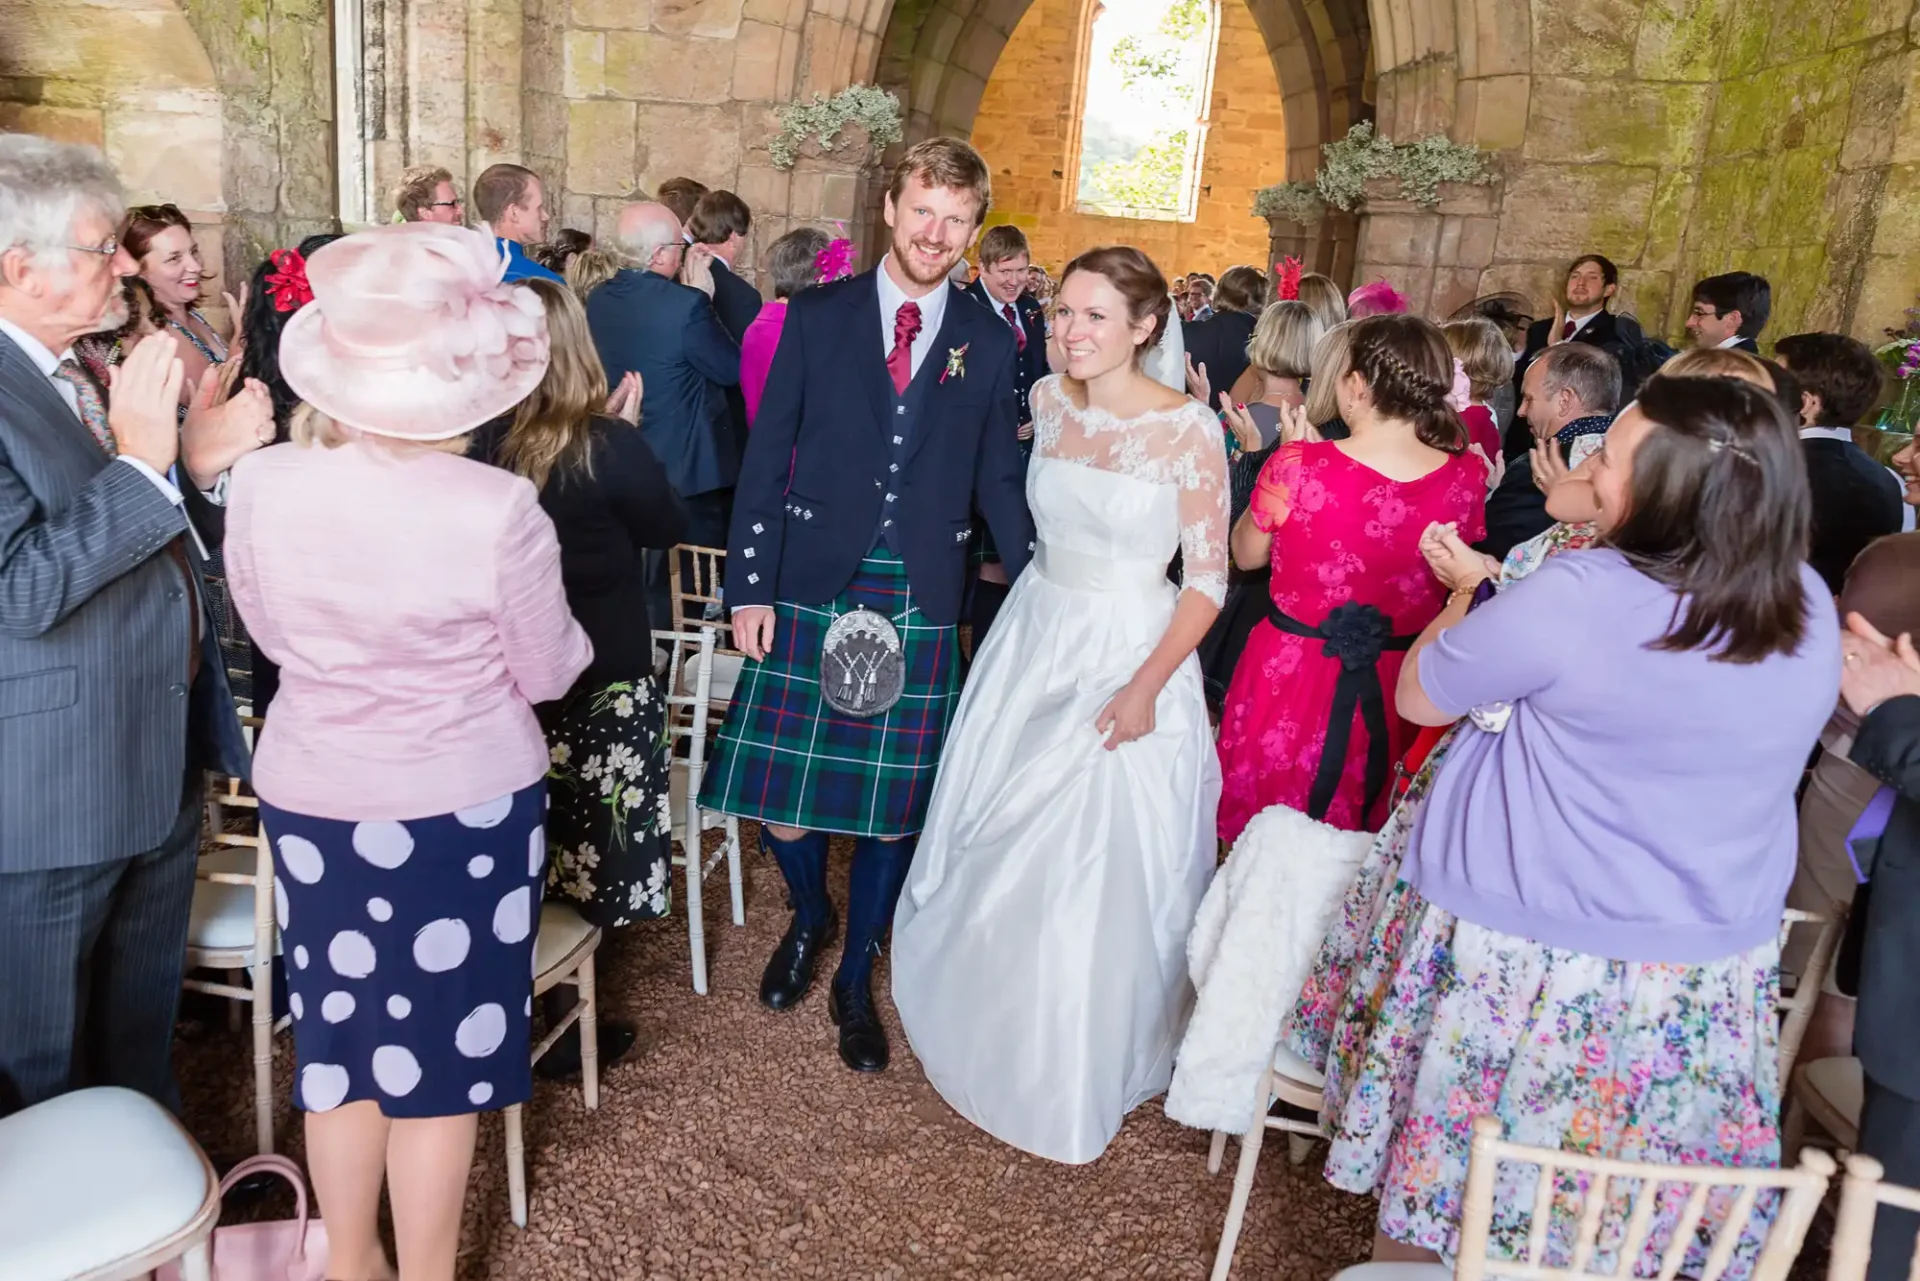 Bride and groom smiling as they walk through guests clapping inside a historic church, the groom wearing a kilt.